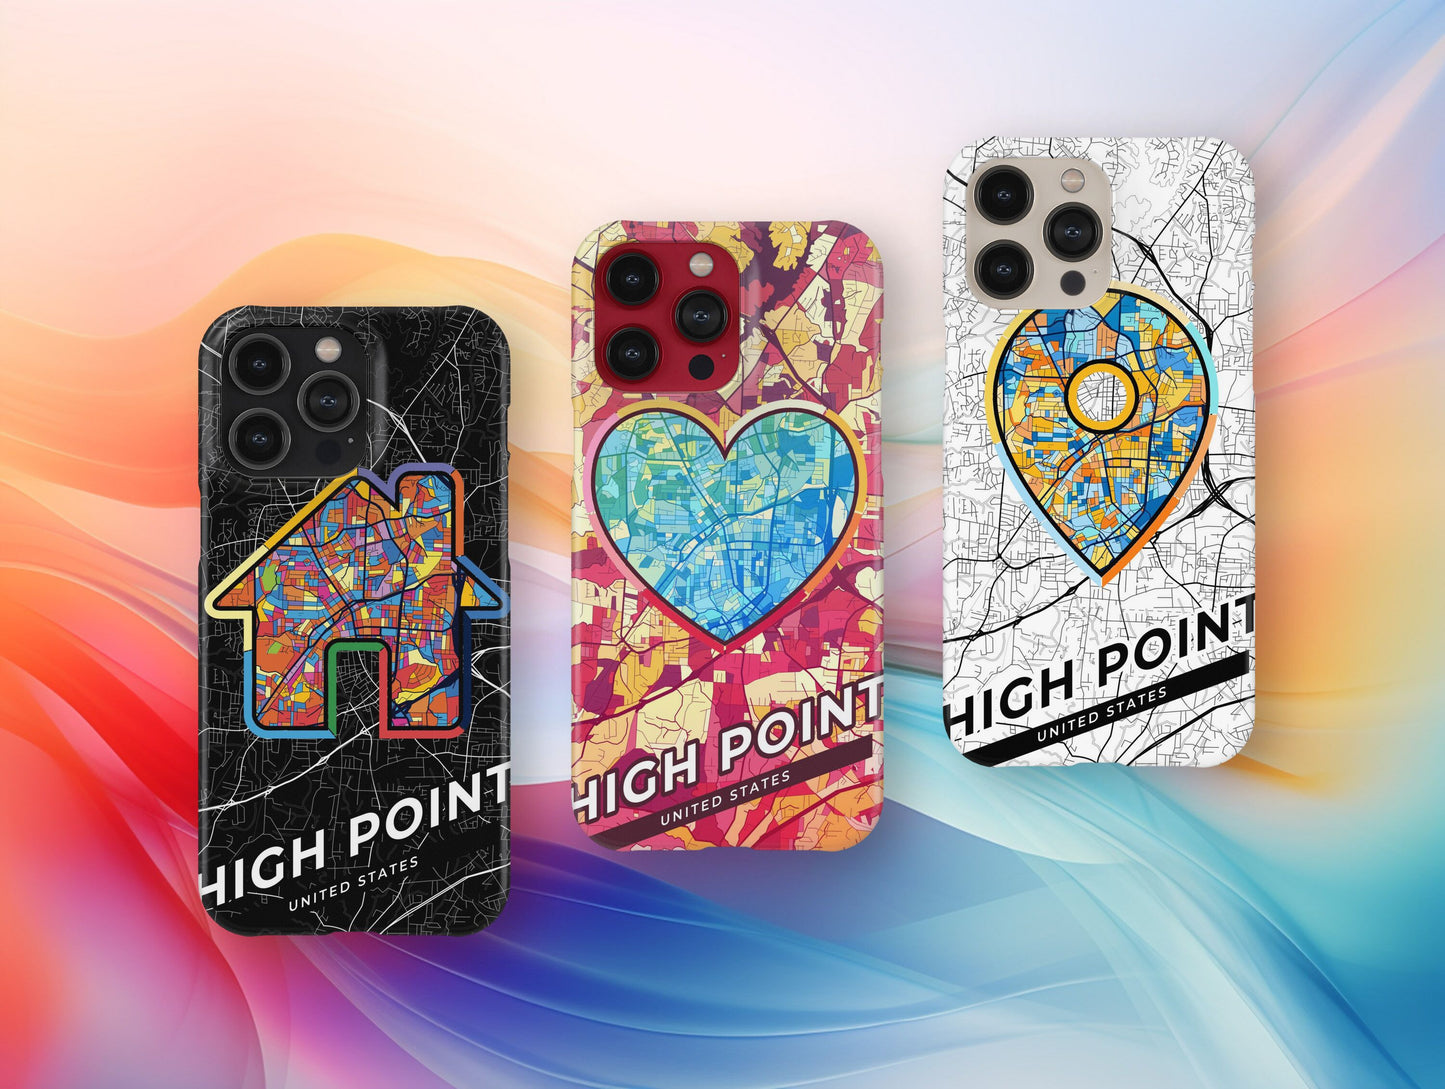 High Point North Carolina slim phone case with colorful icon. Birthday, wedding or housewarming gift. Couple match cases.